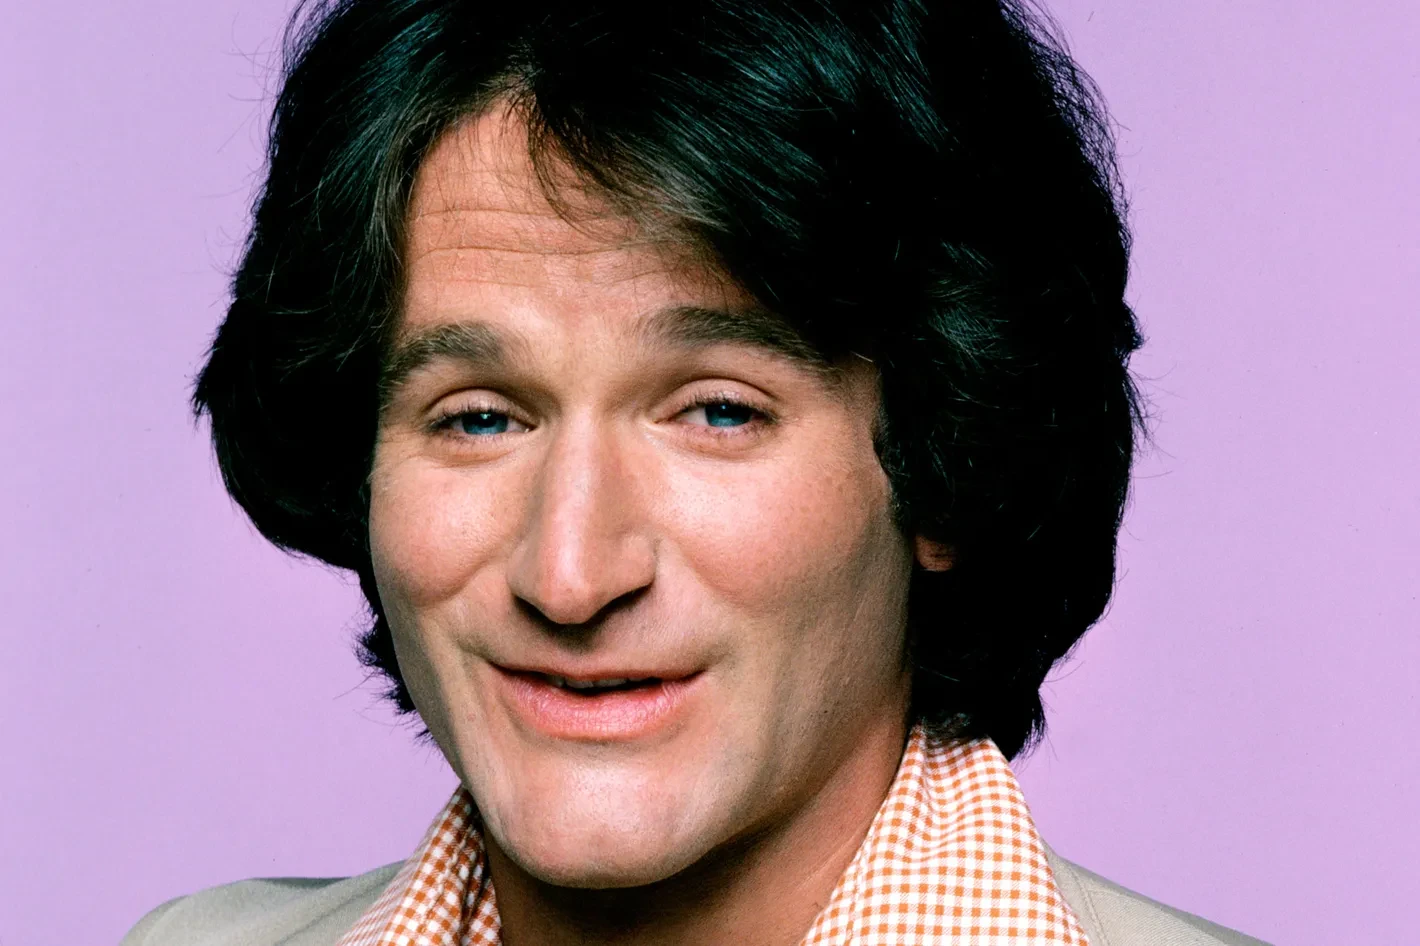 Exceptional talent Robin Williams